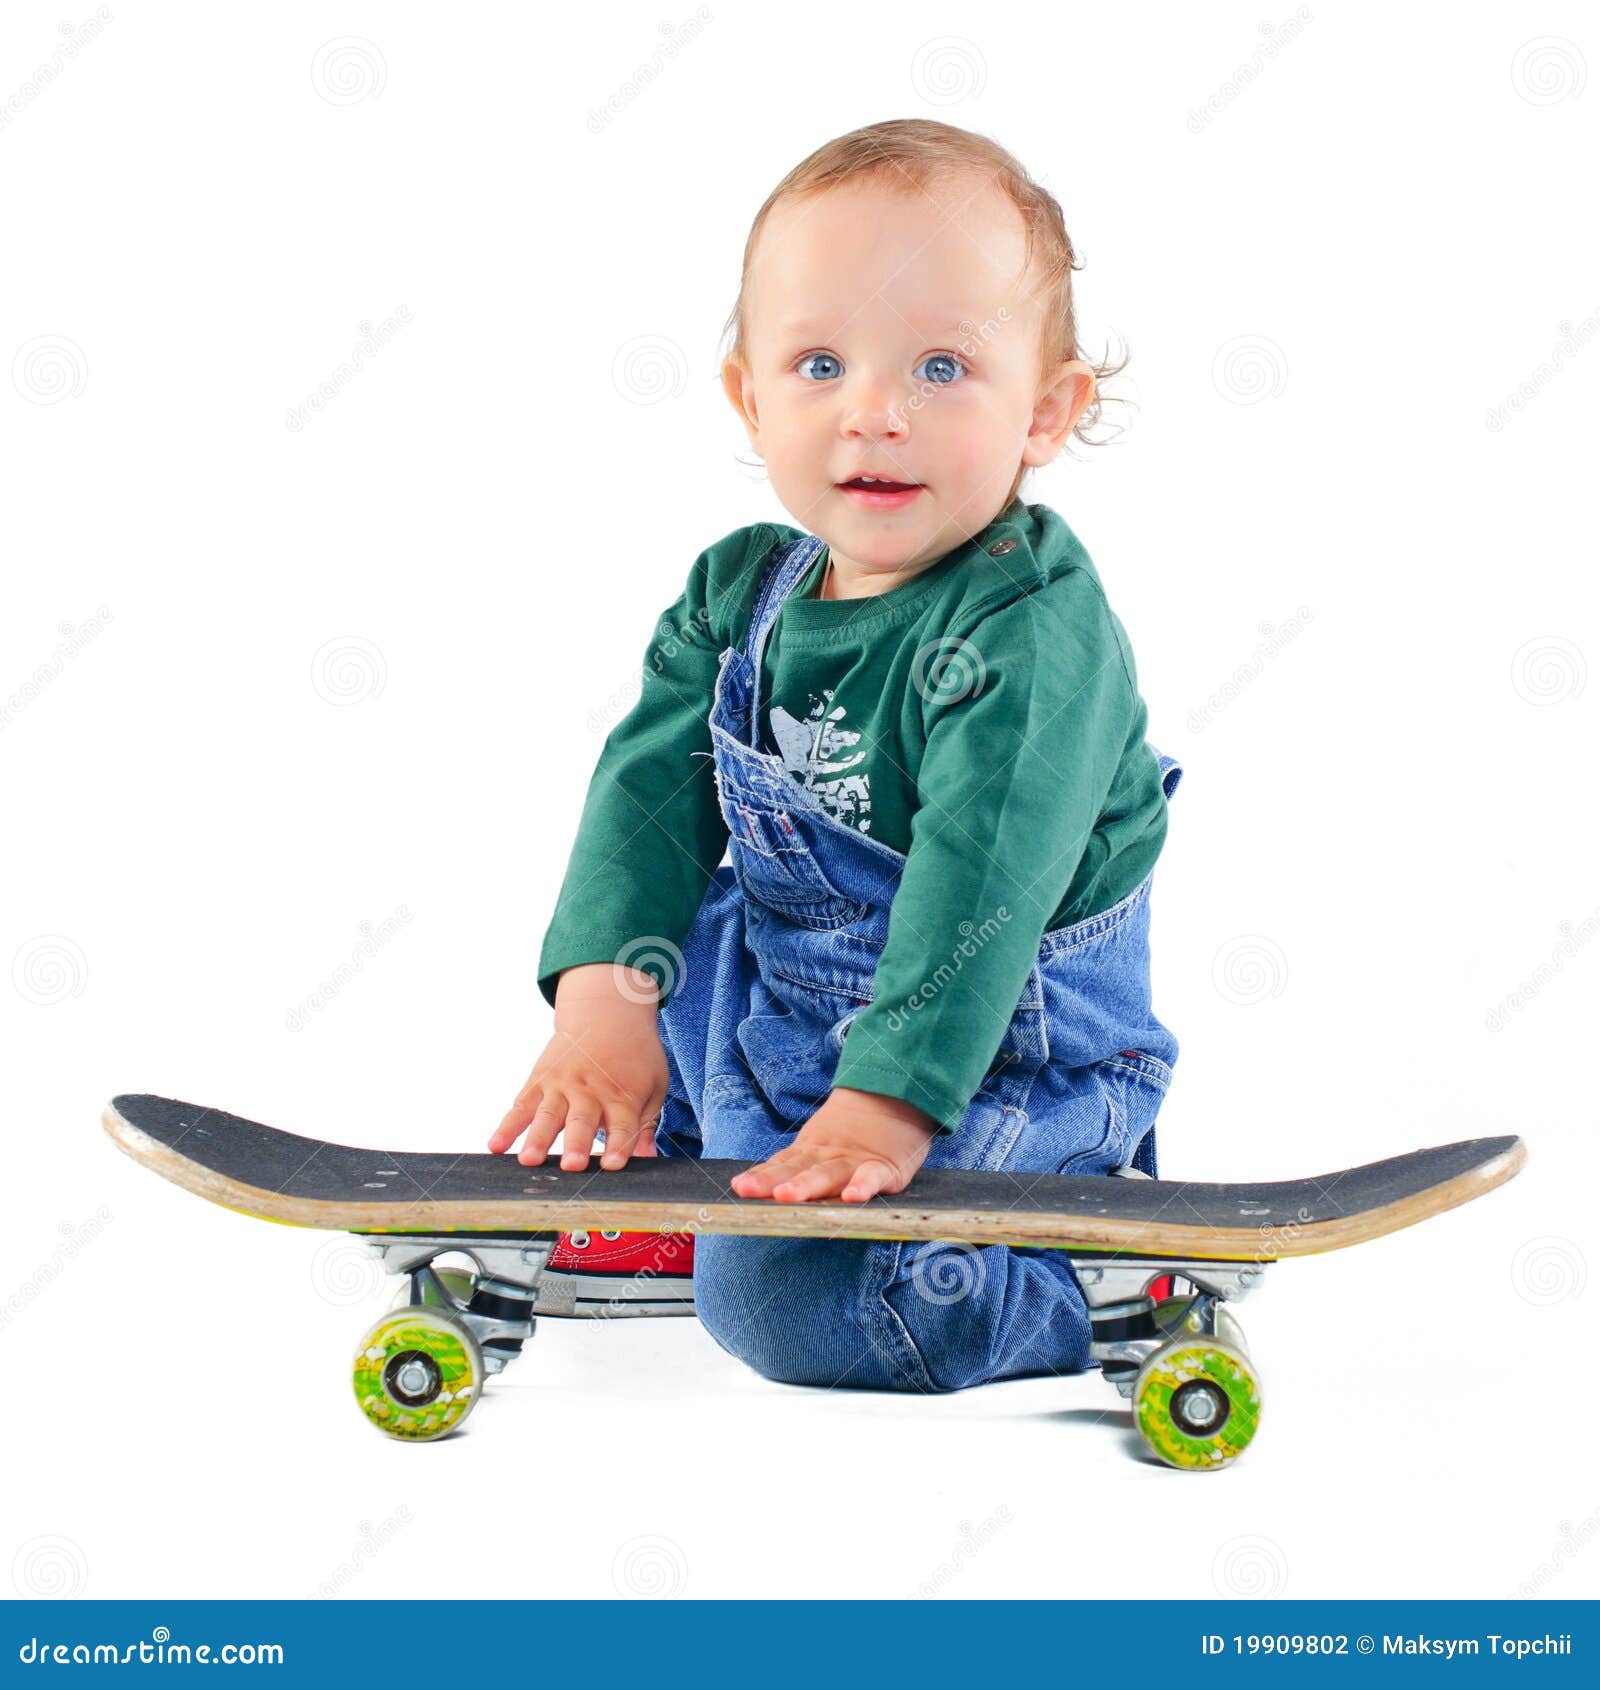 Little boy on a skateboard stock photo. Image of extreme - 19909802